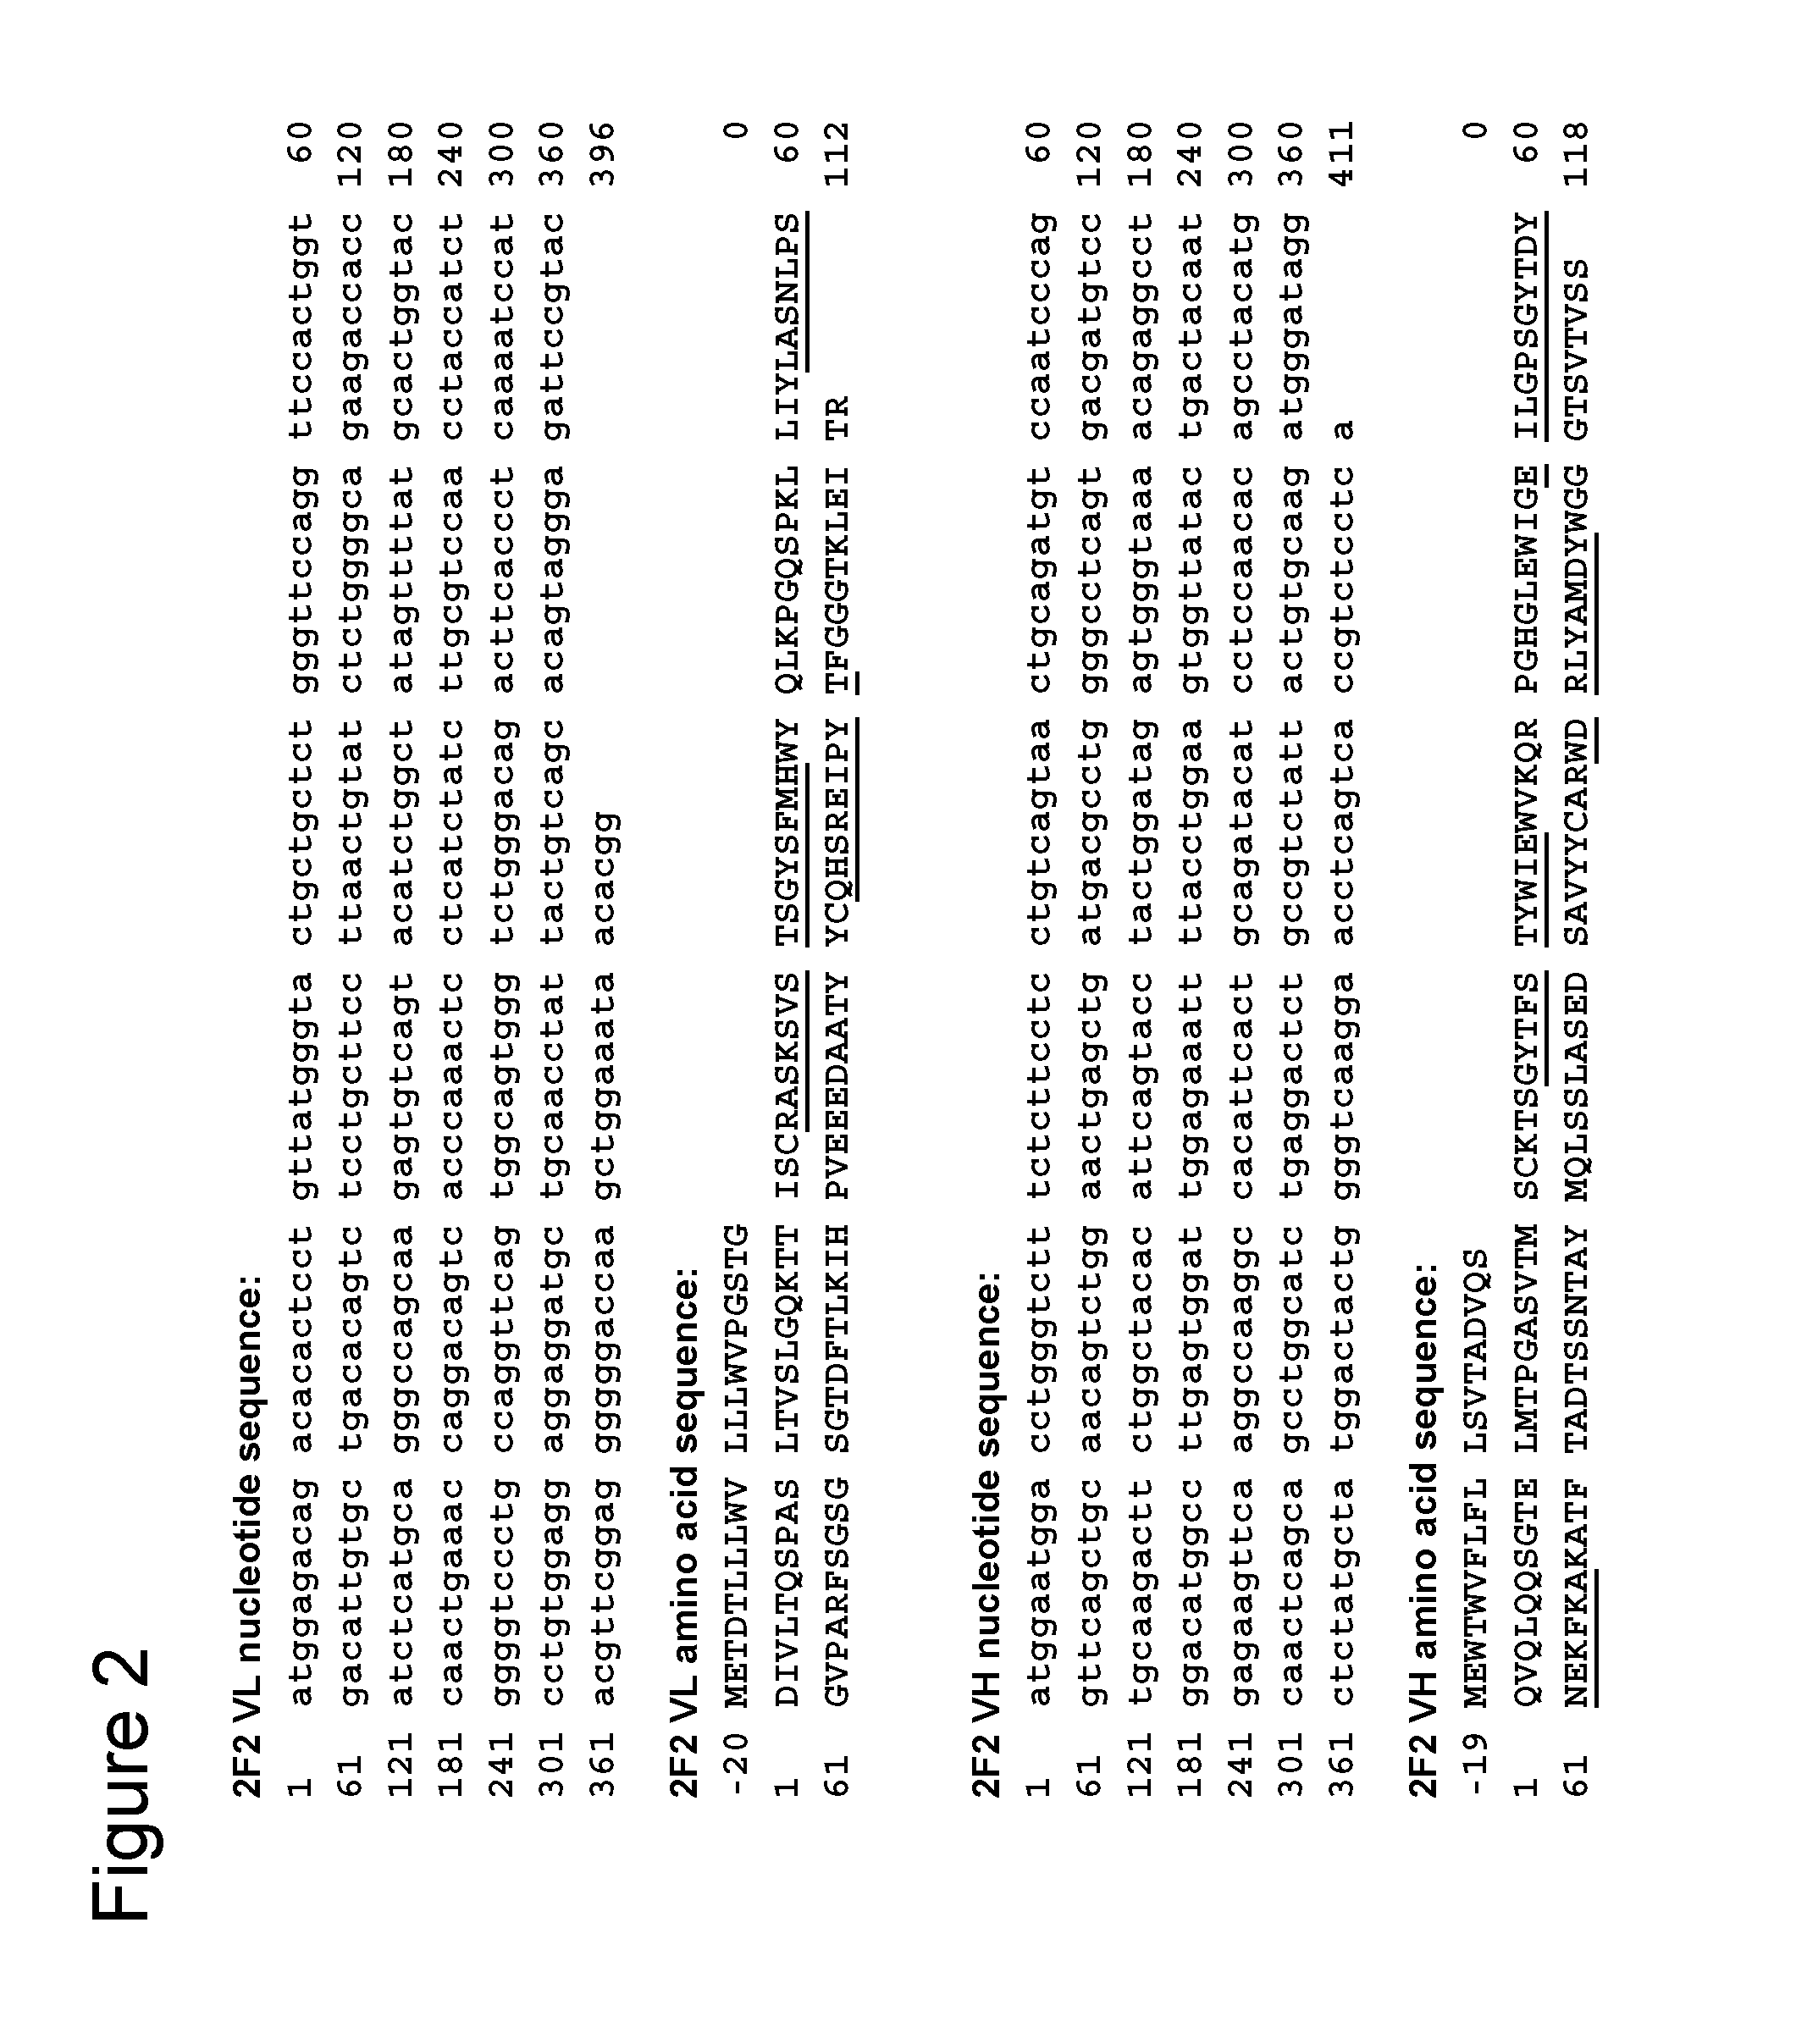 Anti-CD70 Antibody and Its Use for the Treatment and Prevention of Cancer and Immune Disorders